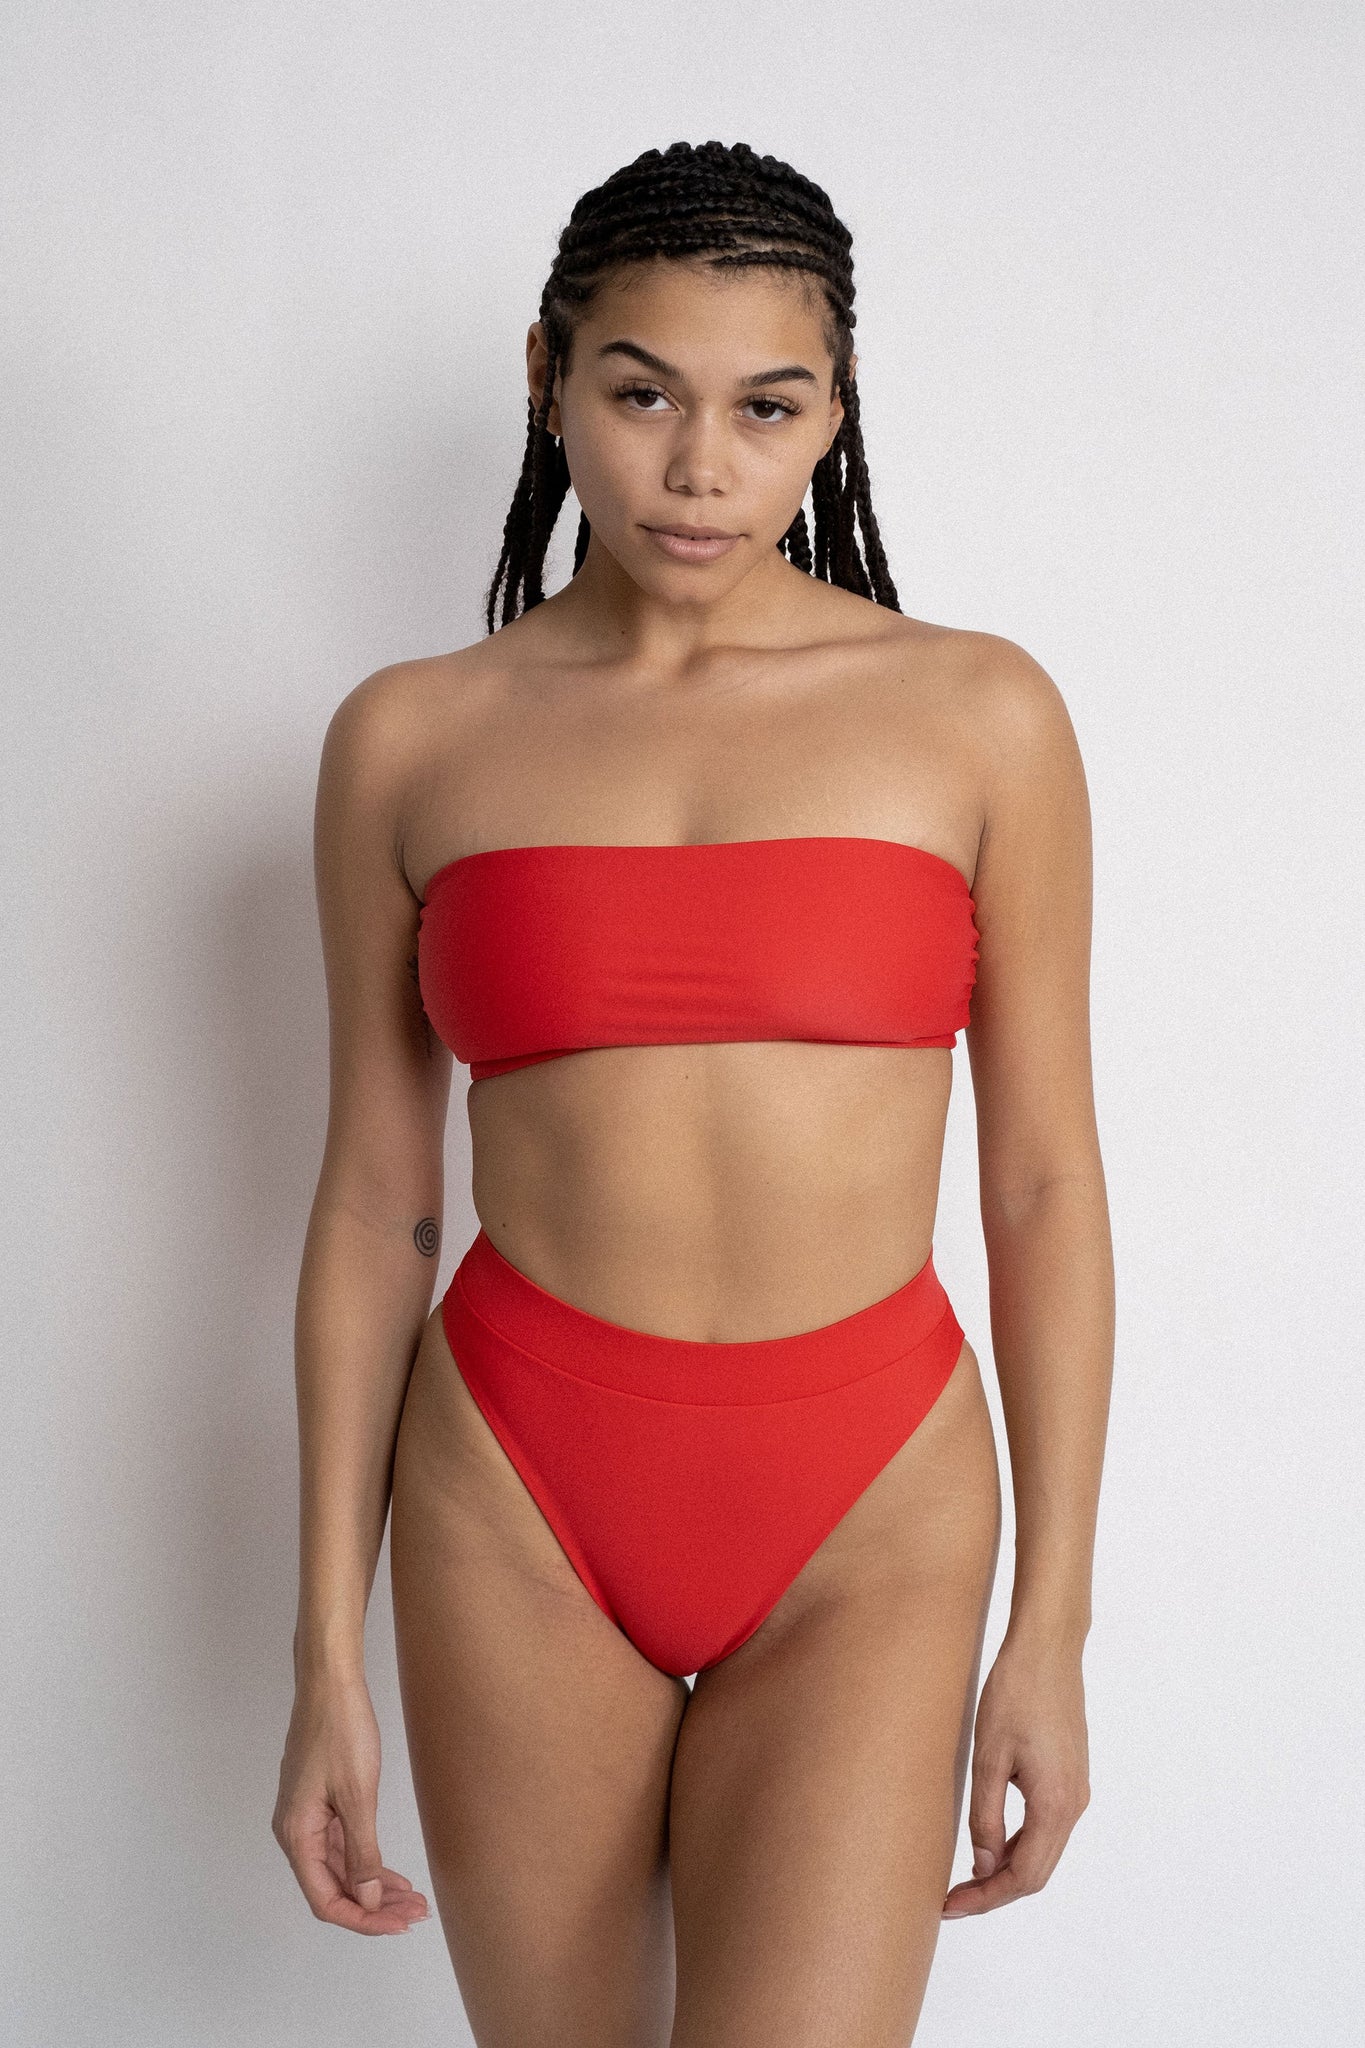 Woman standing in front of a white wall with her arms by her side wearing bright red high waisted bottoms with a matching bright red strapless bandeau bikini top.